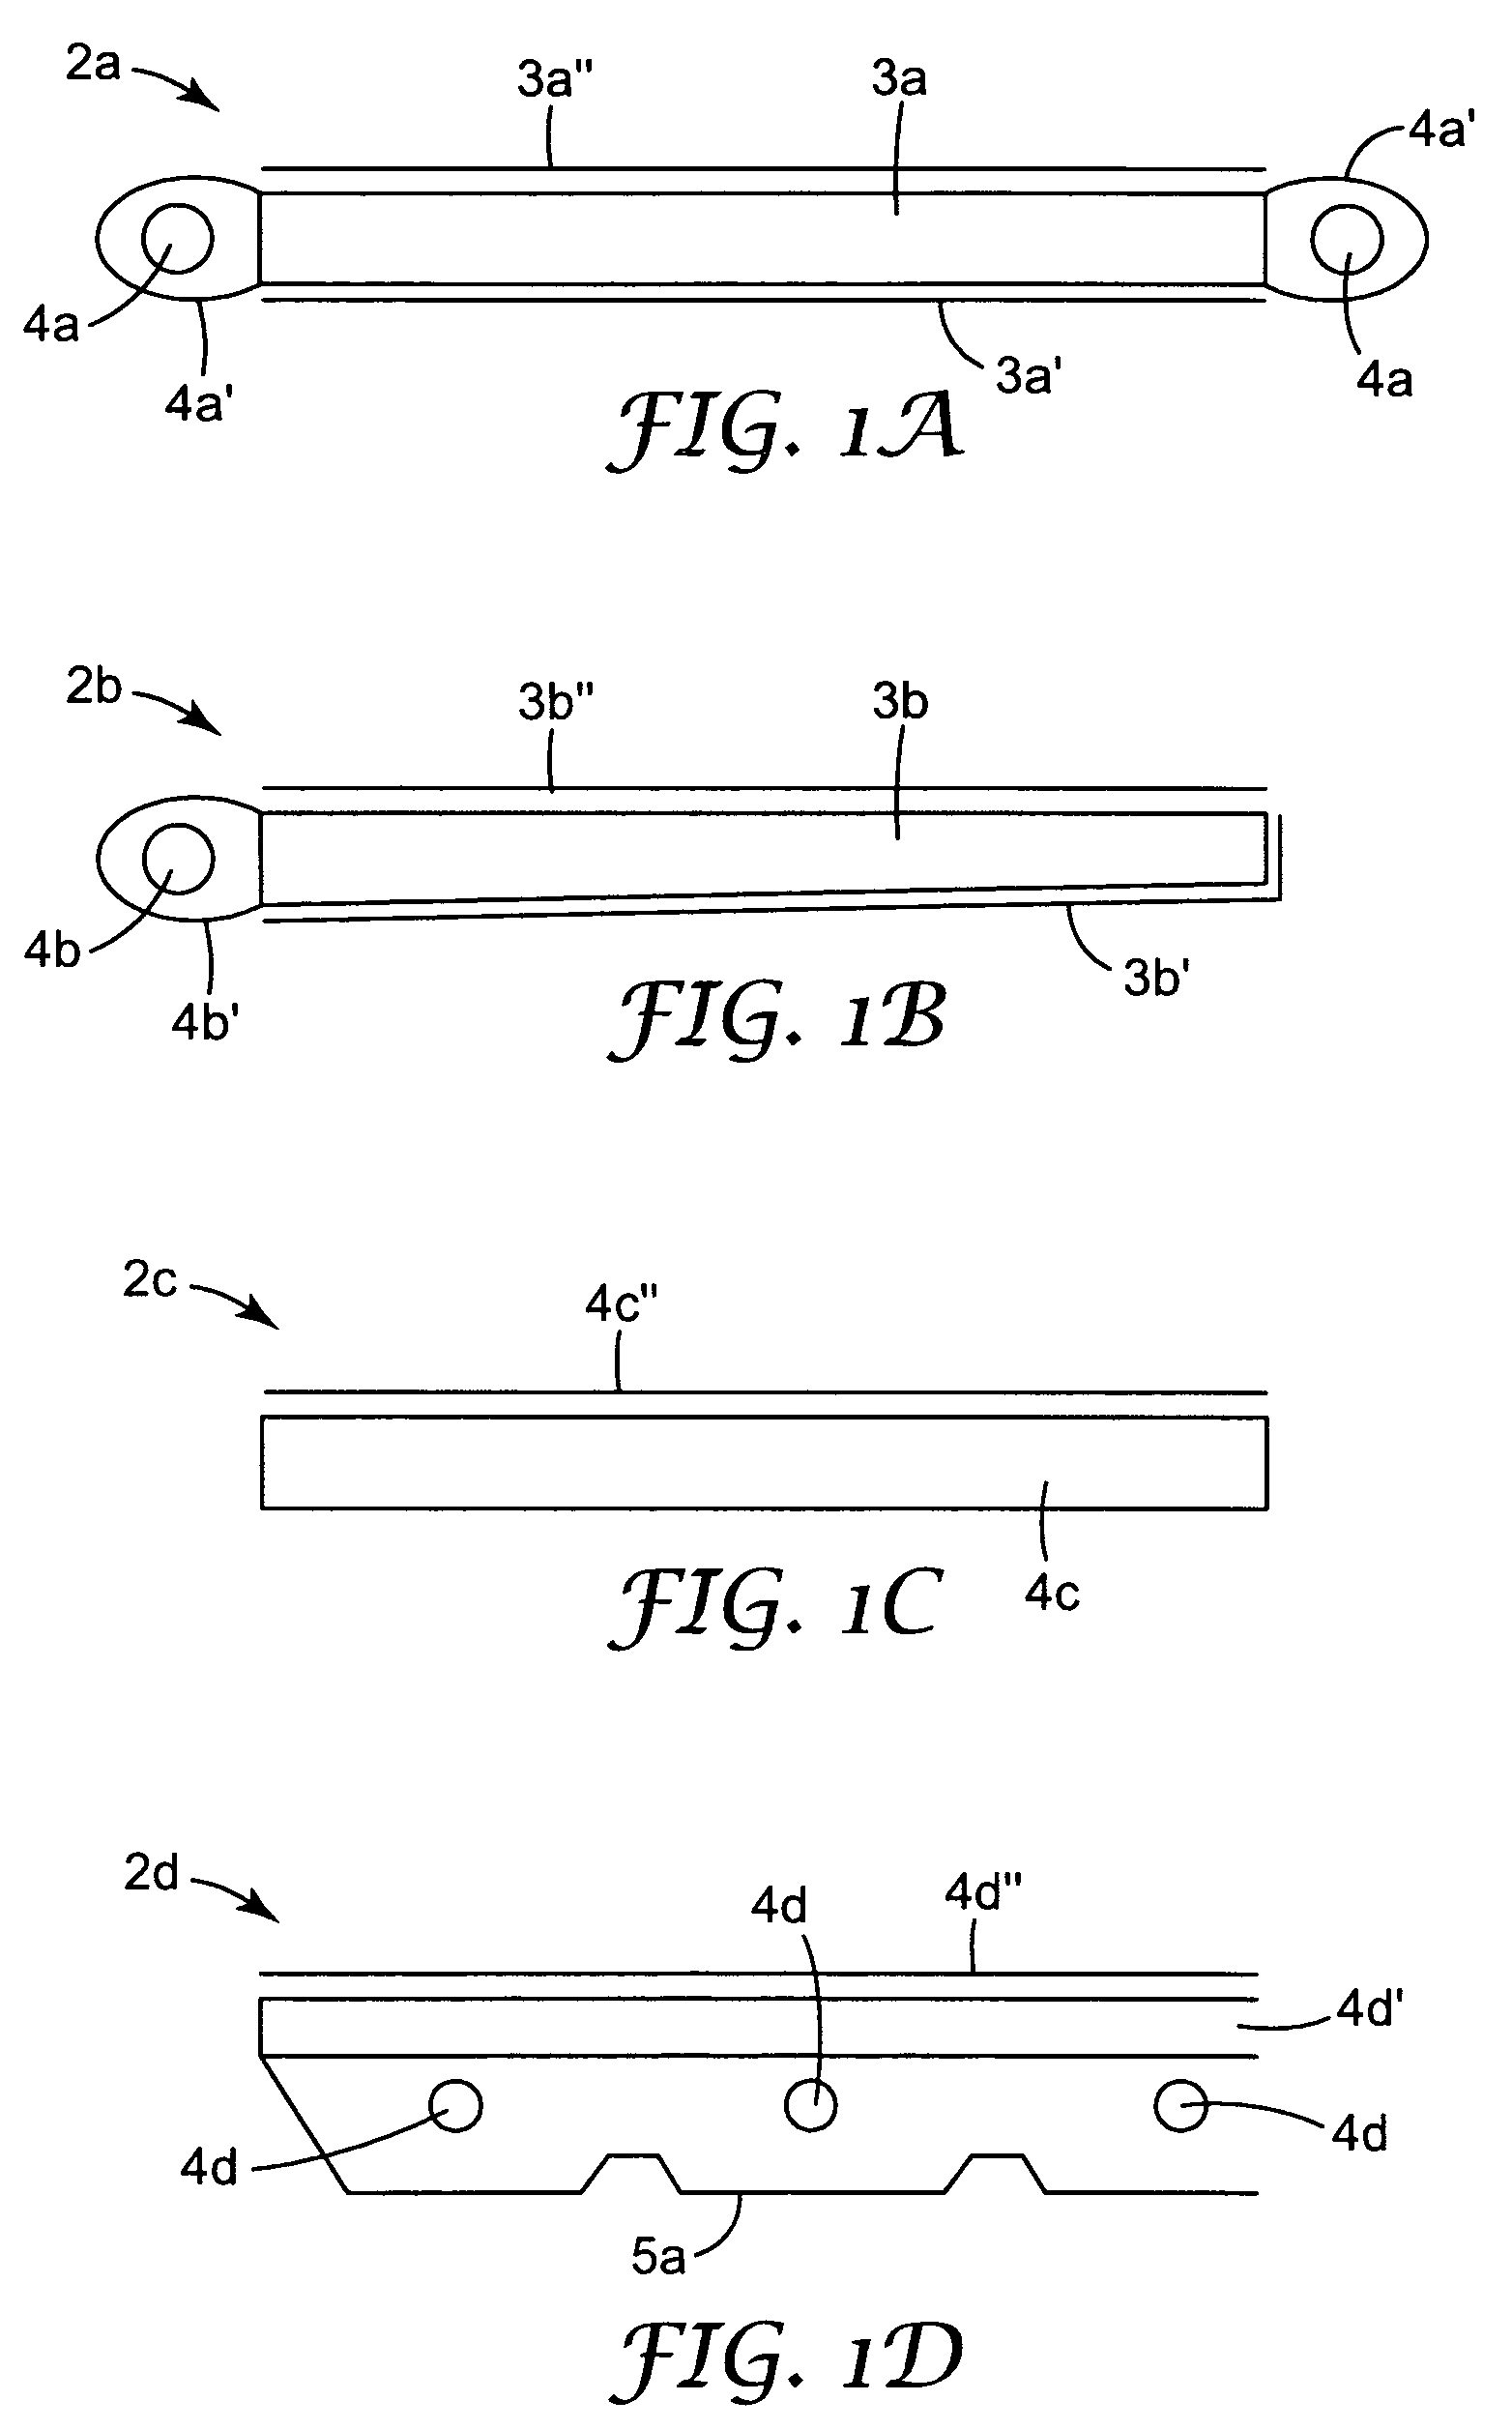 Optical film having a structured surface with concave pyramid-shaped structures